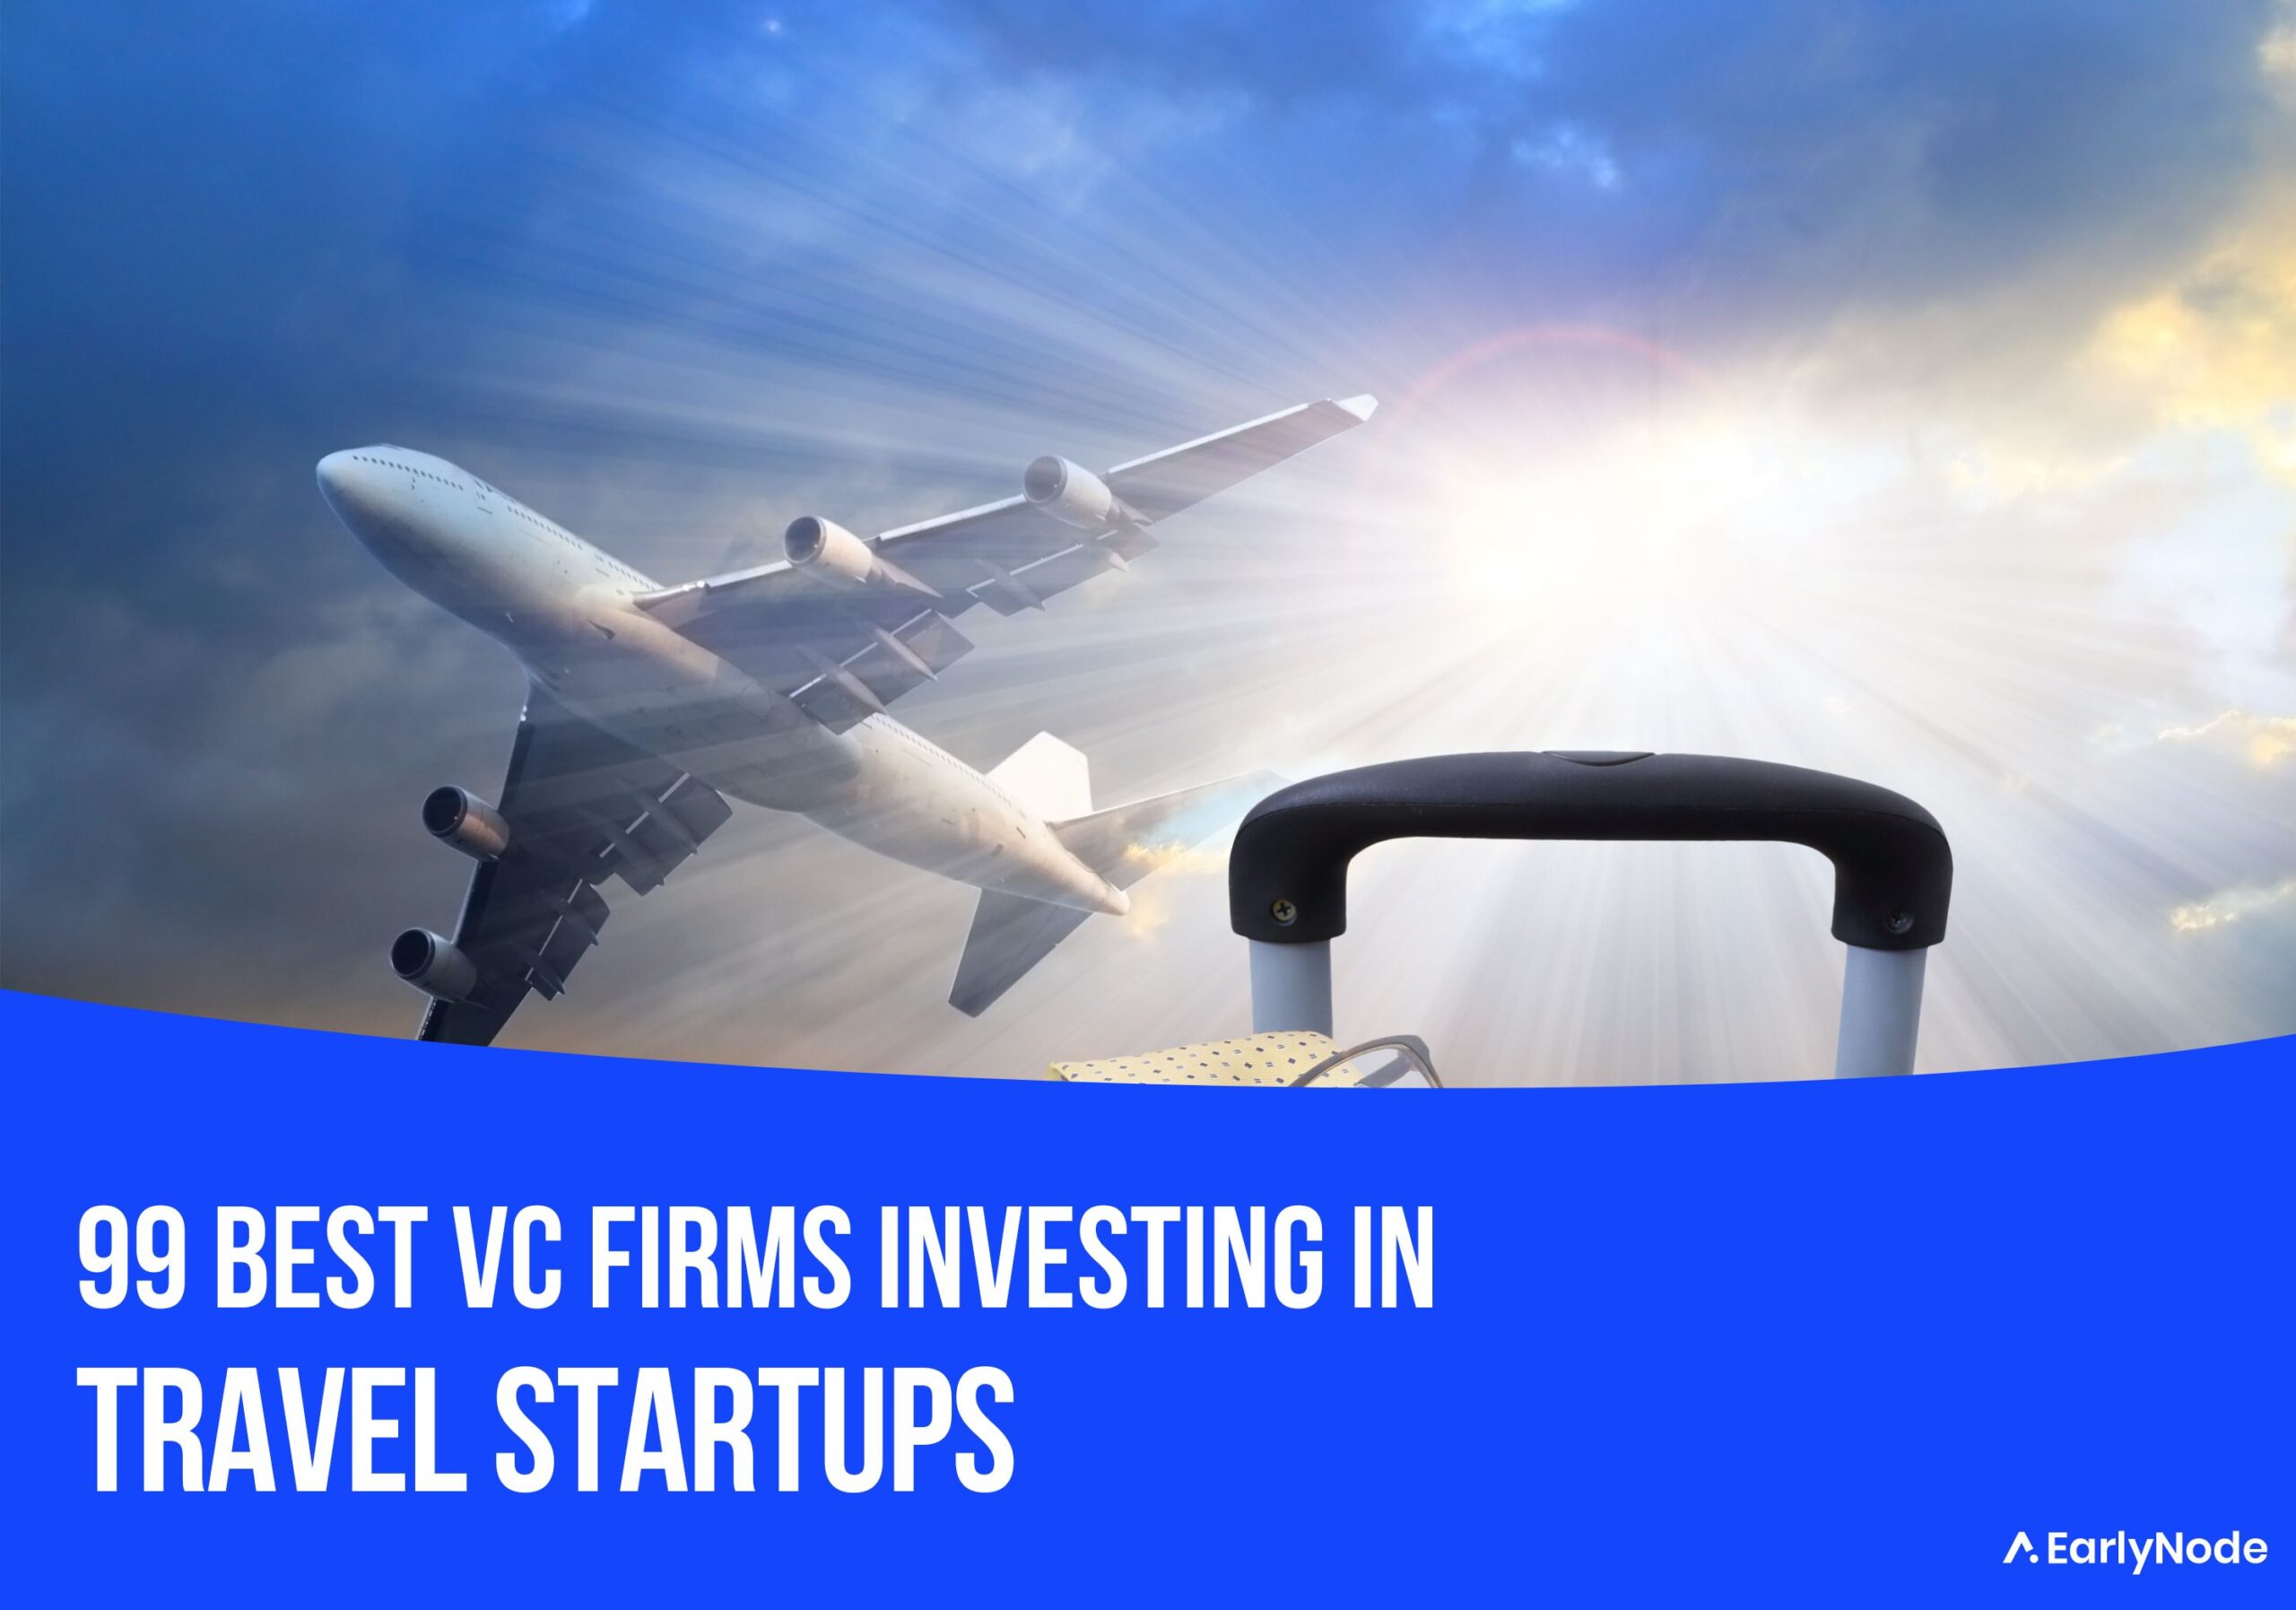 99 Best Venture Capital (VC) Firms That Invest In Travel Startups